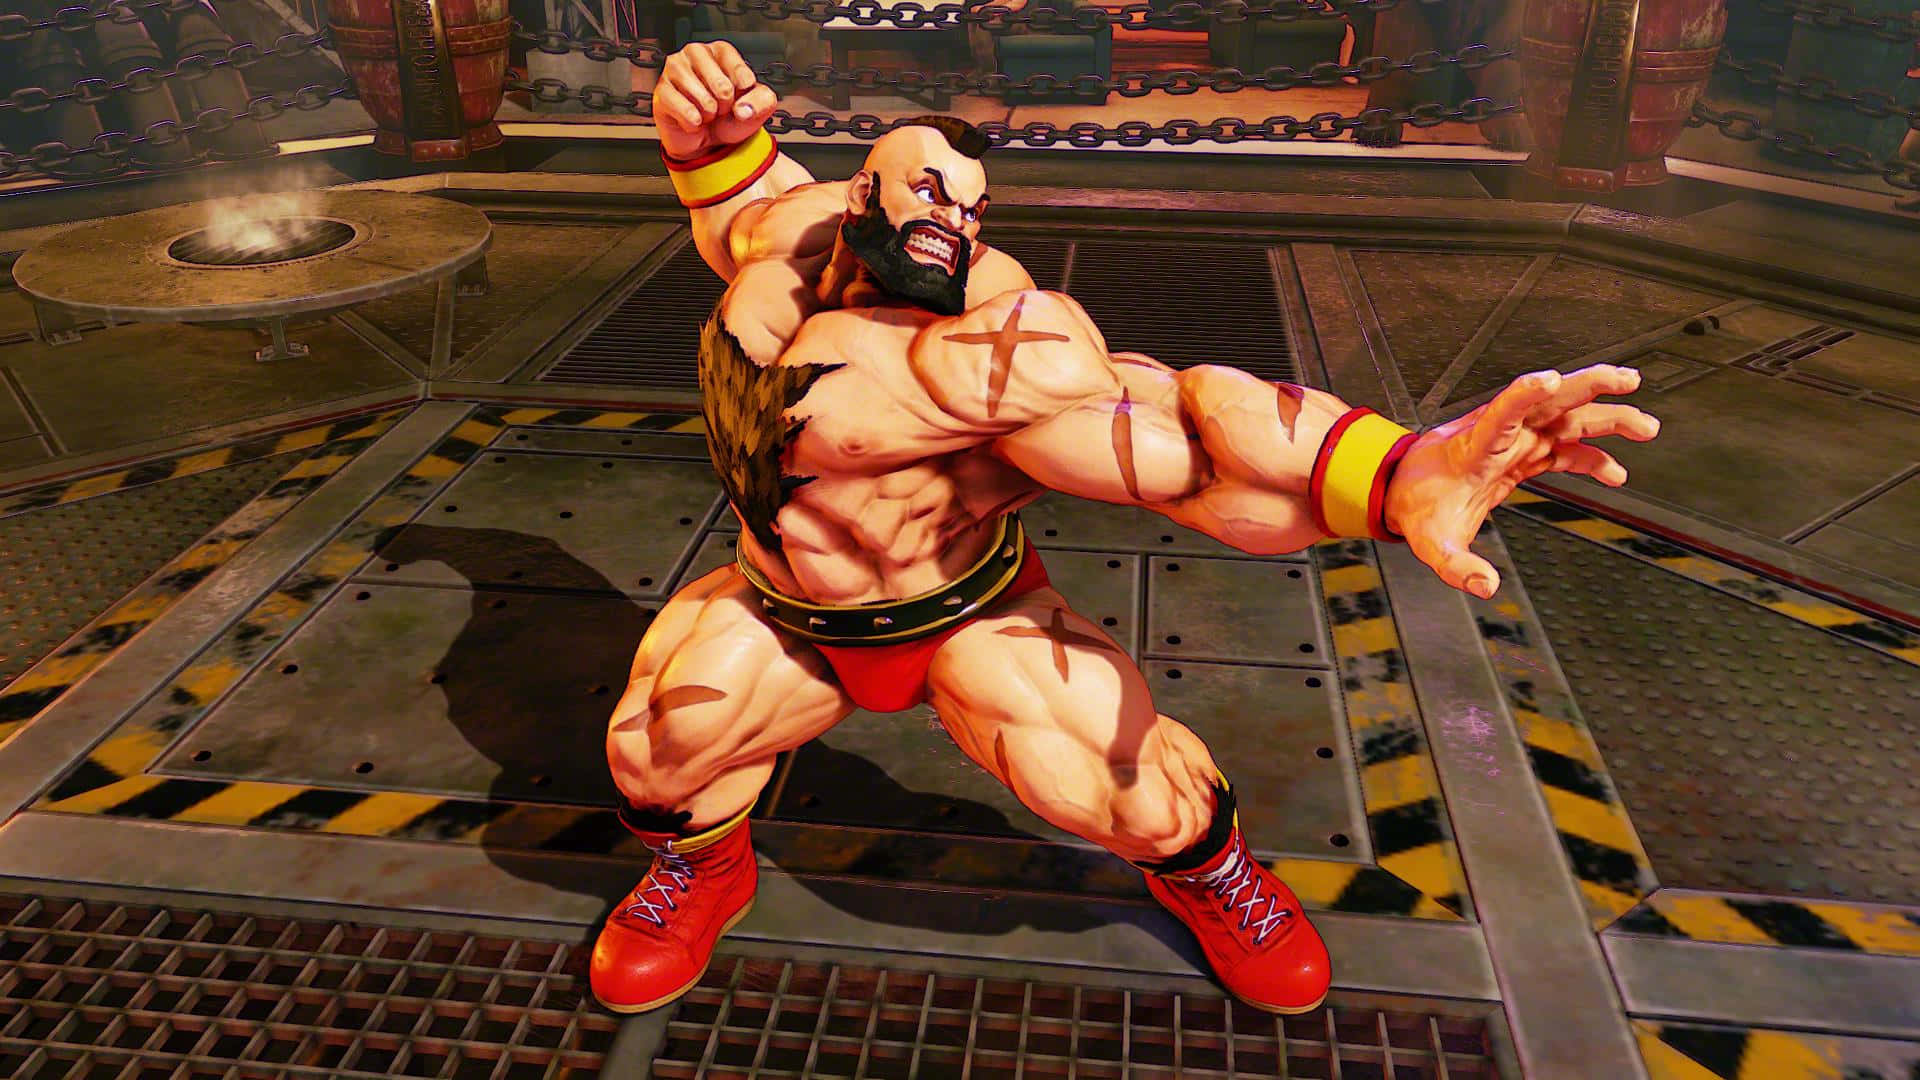 Street Fighter Zangief Action Pose Wallpaper